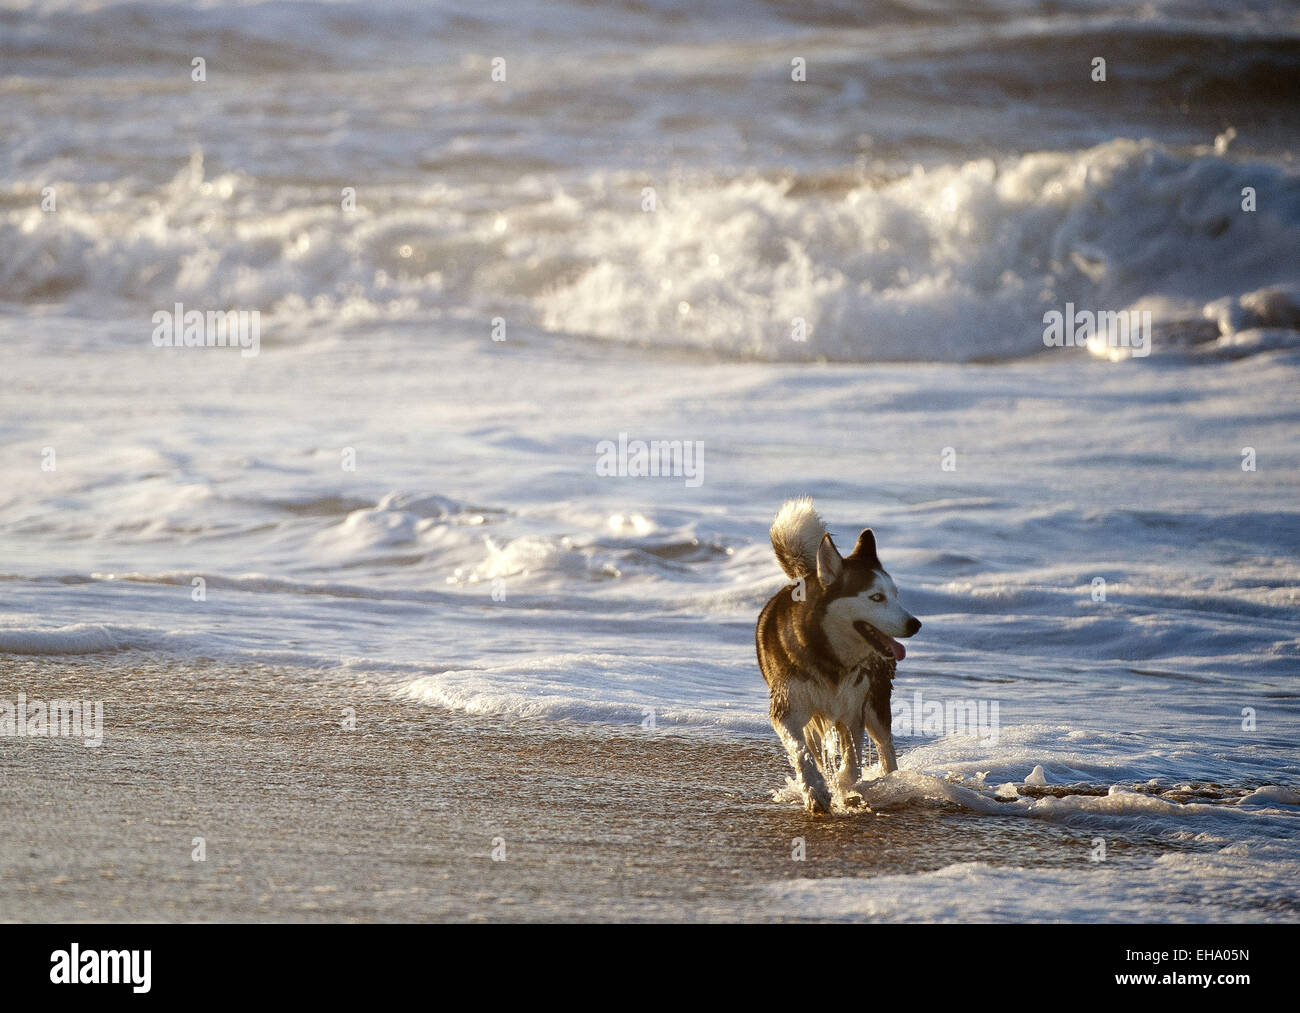 California, USA. 26th Aug, 2014. Early in the morning on Sunday August 24, 2014, a dog explores the shoreline at San Clemente State Beach, playing in the waves. © David Bro/ZUMA Wire/Alamy Live News Stock Photo